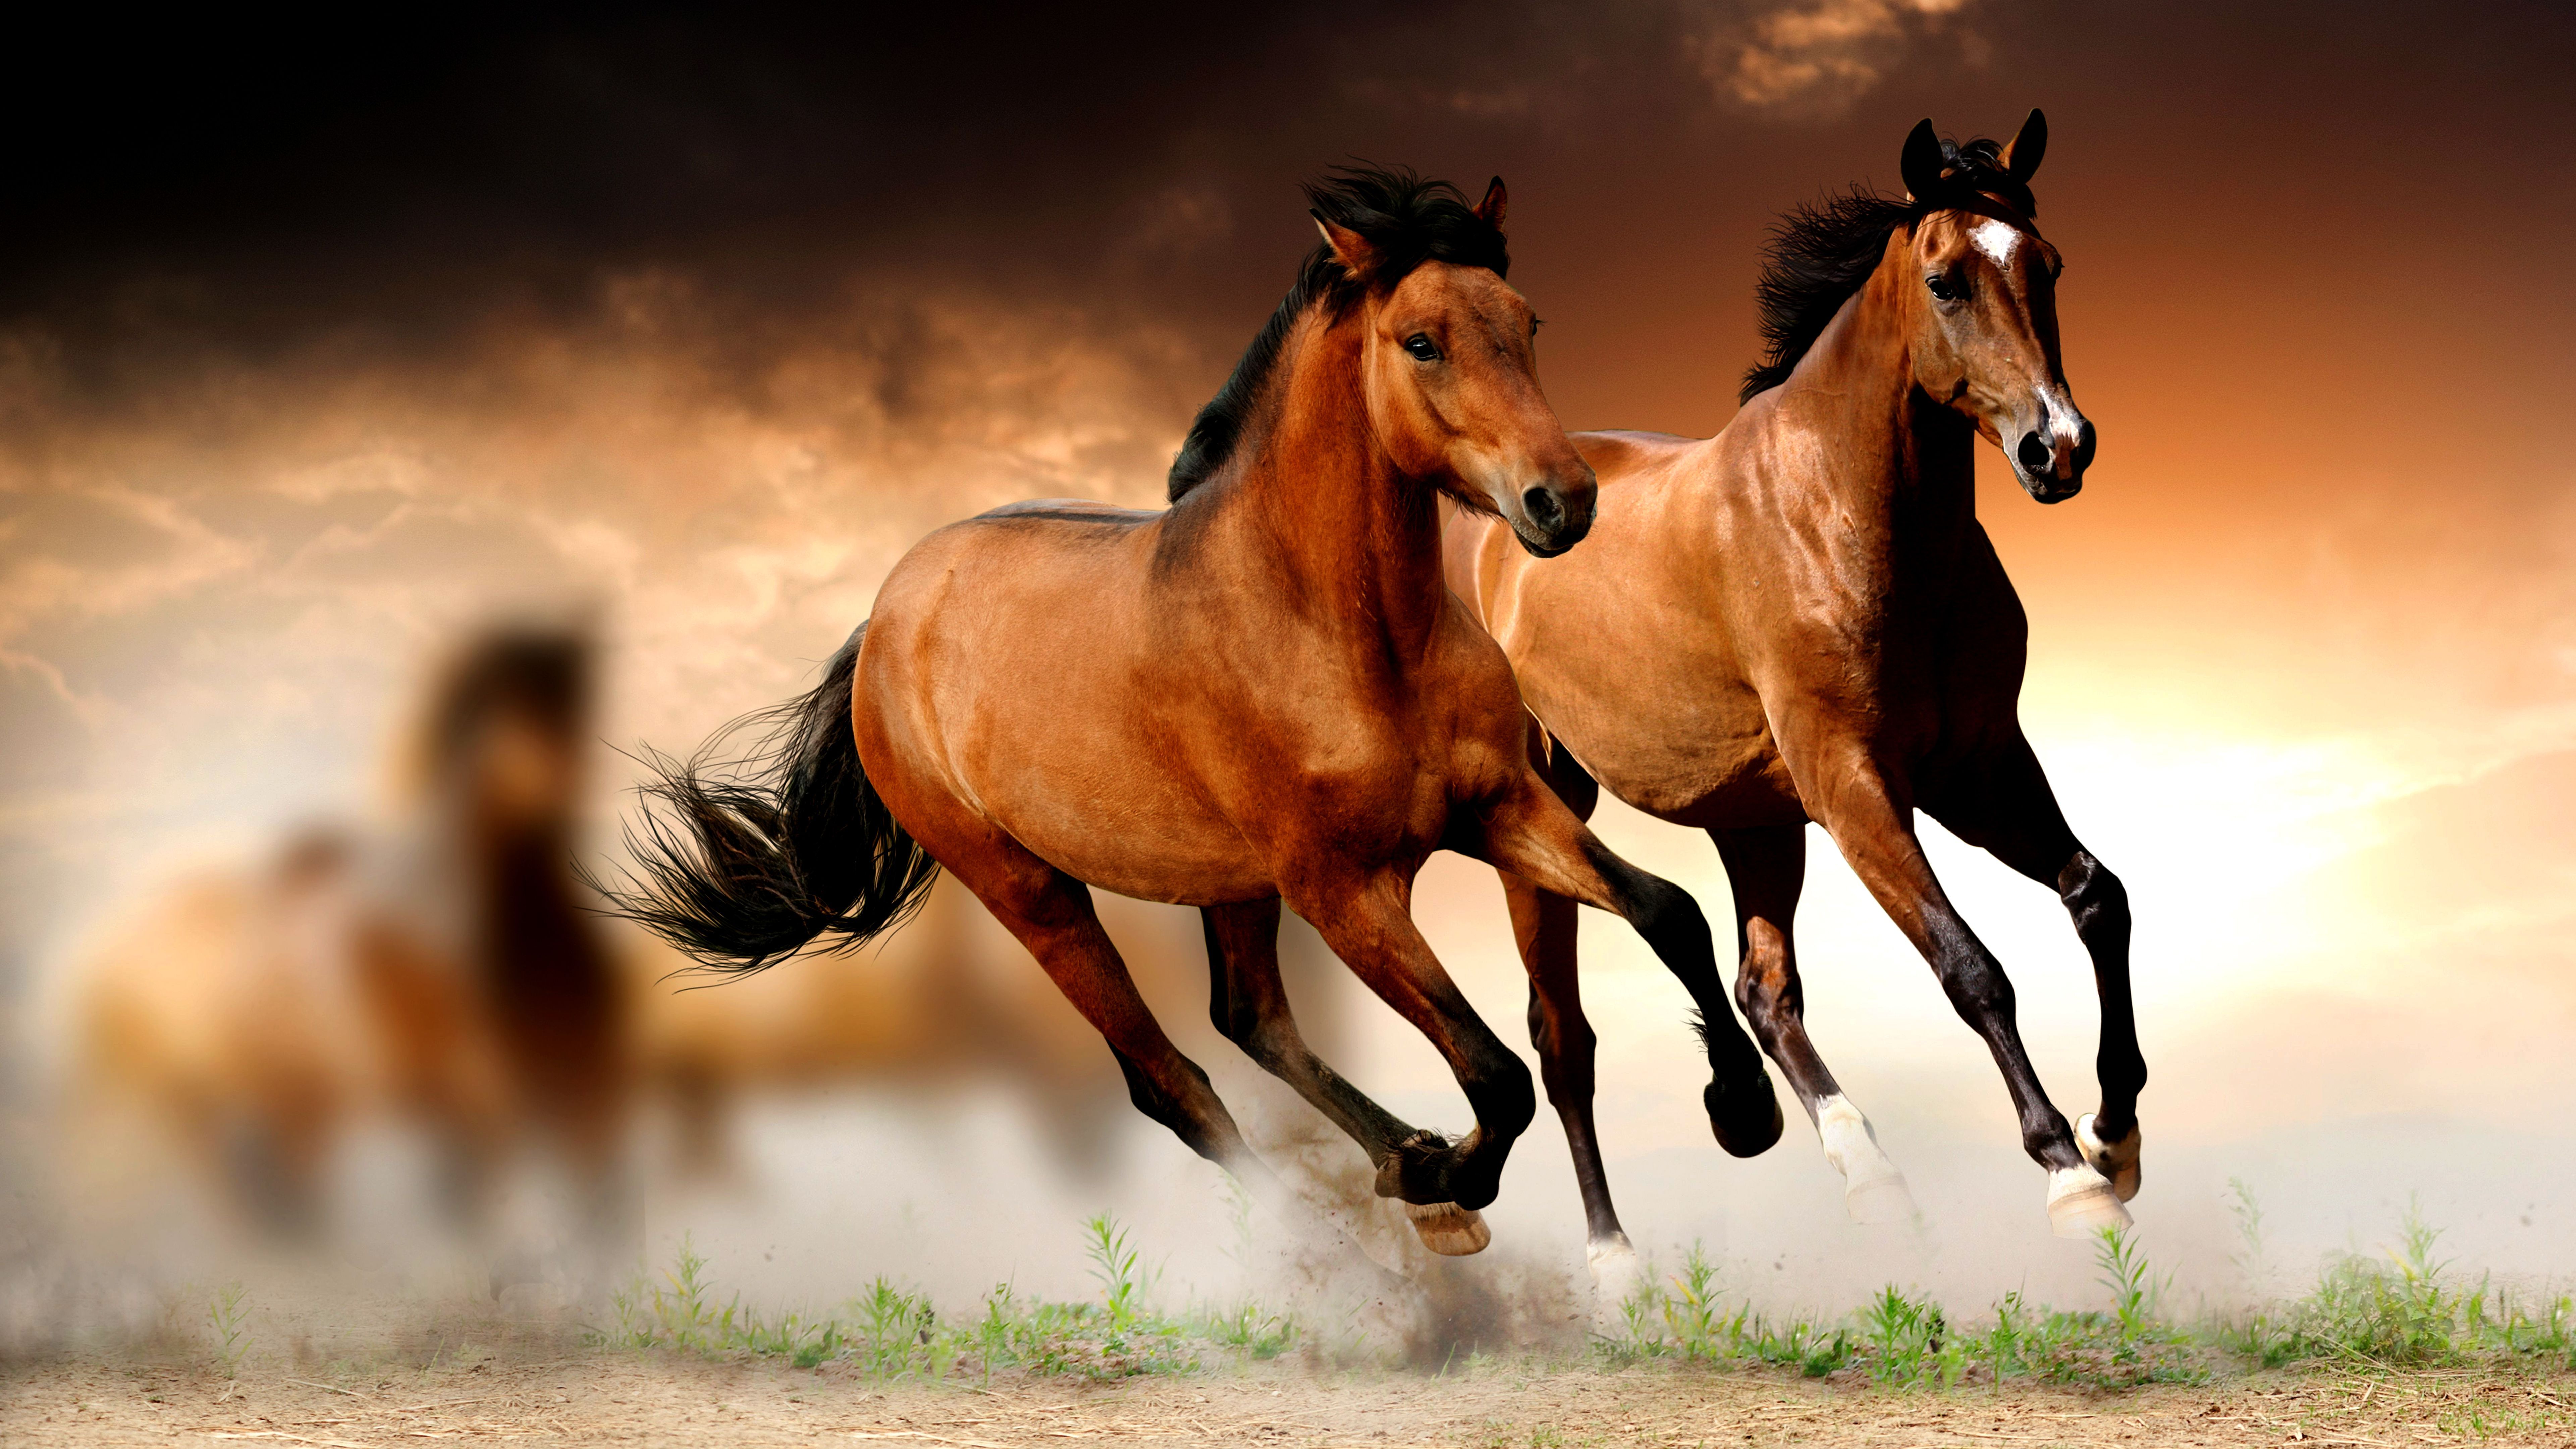 Horse Hd Images Free Download - HD Wallpaper 